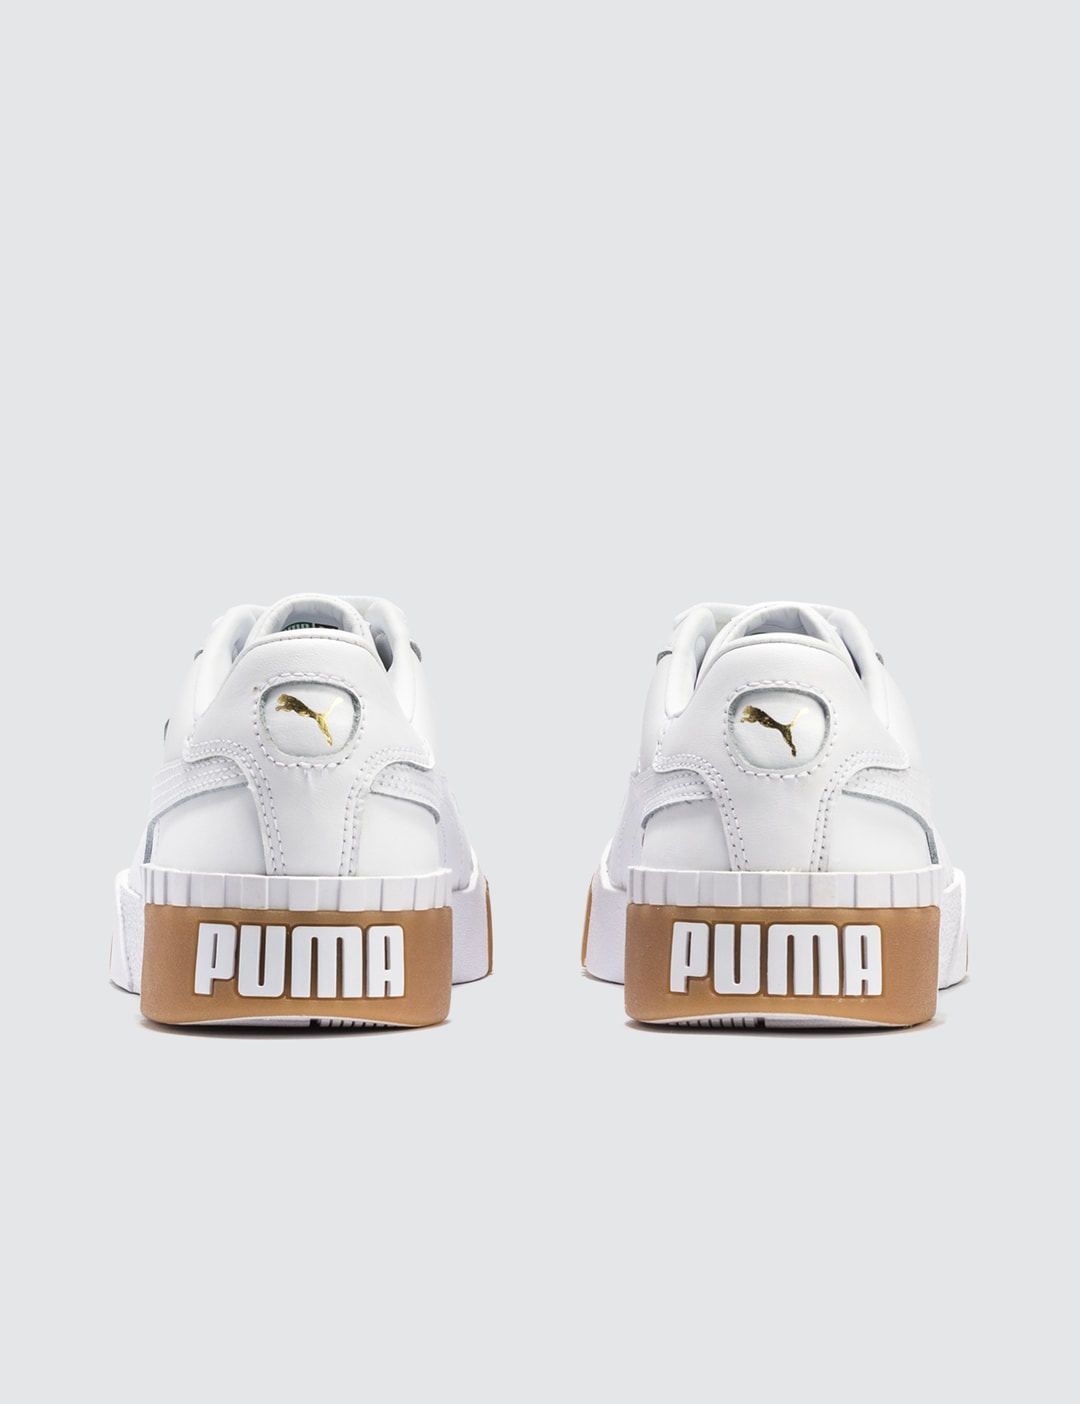 Puma - Cali Exotic Women's Sneaker | HBX - Globally Curated Fashion and ...